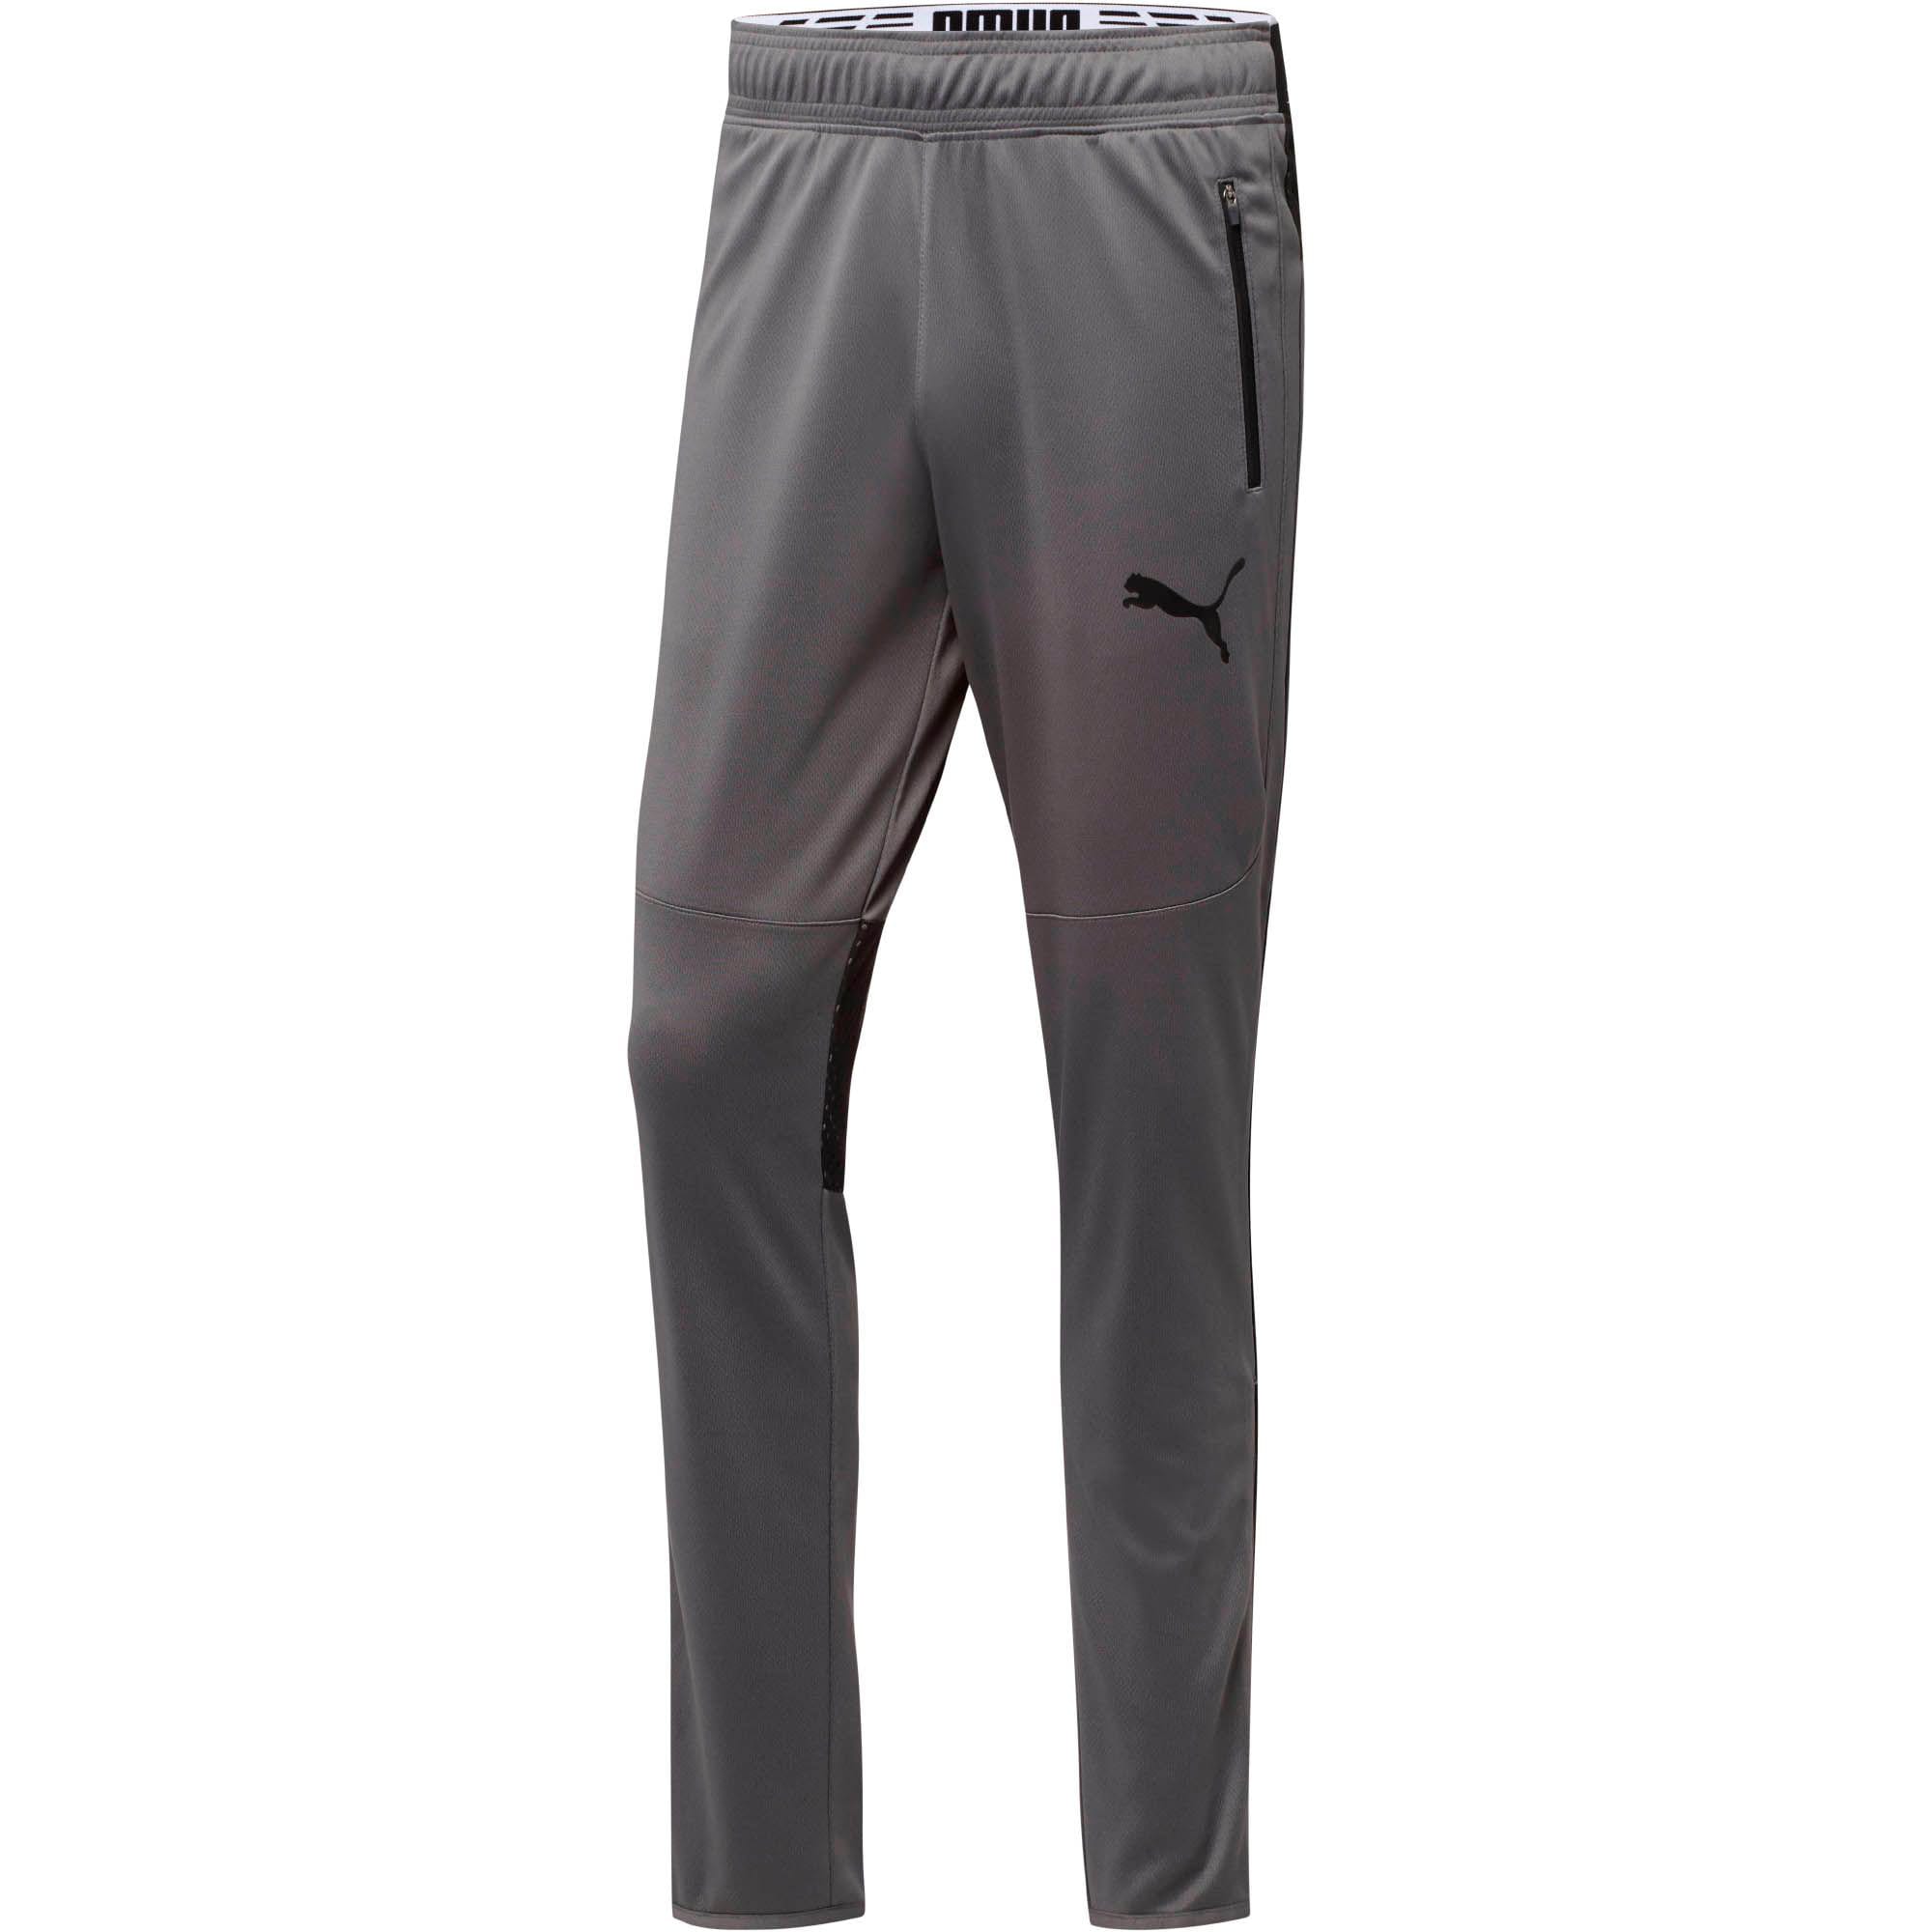 puma dry cell track pants